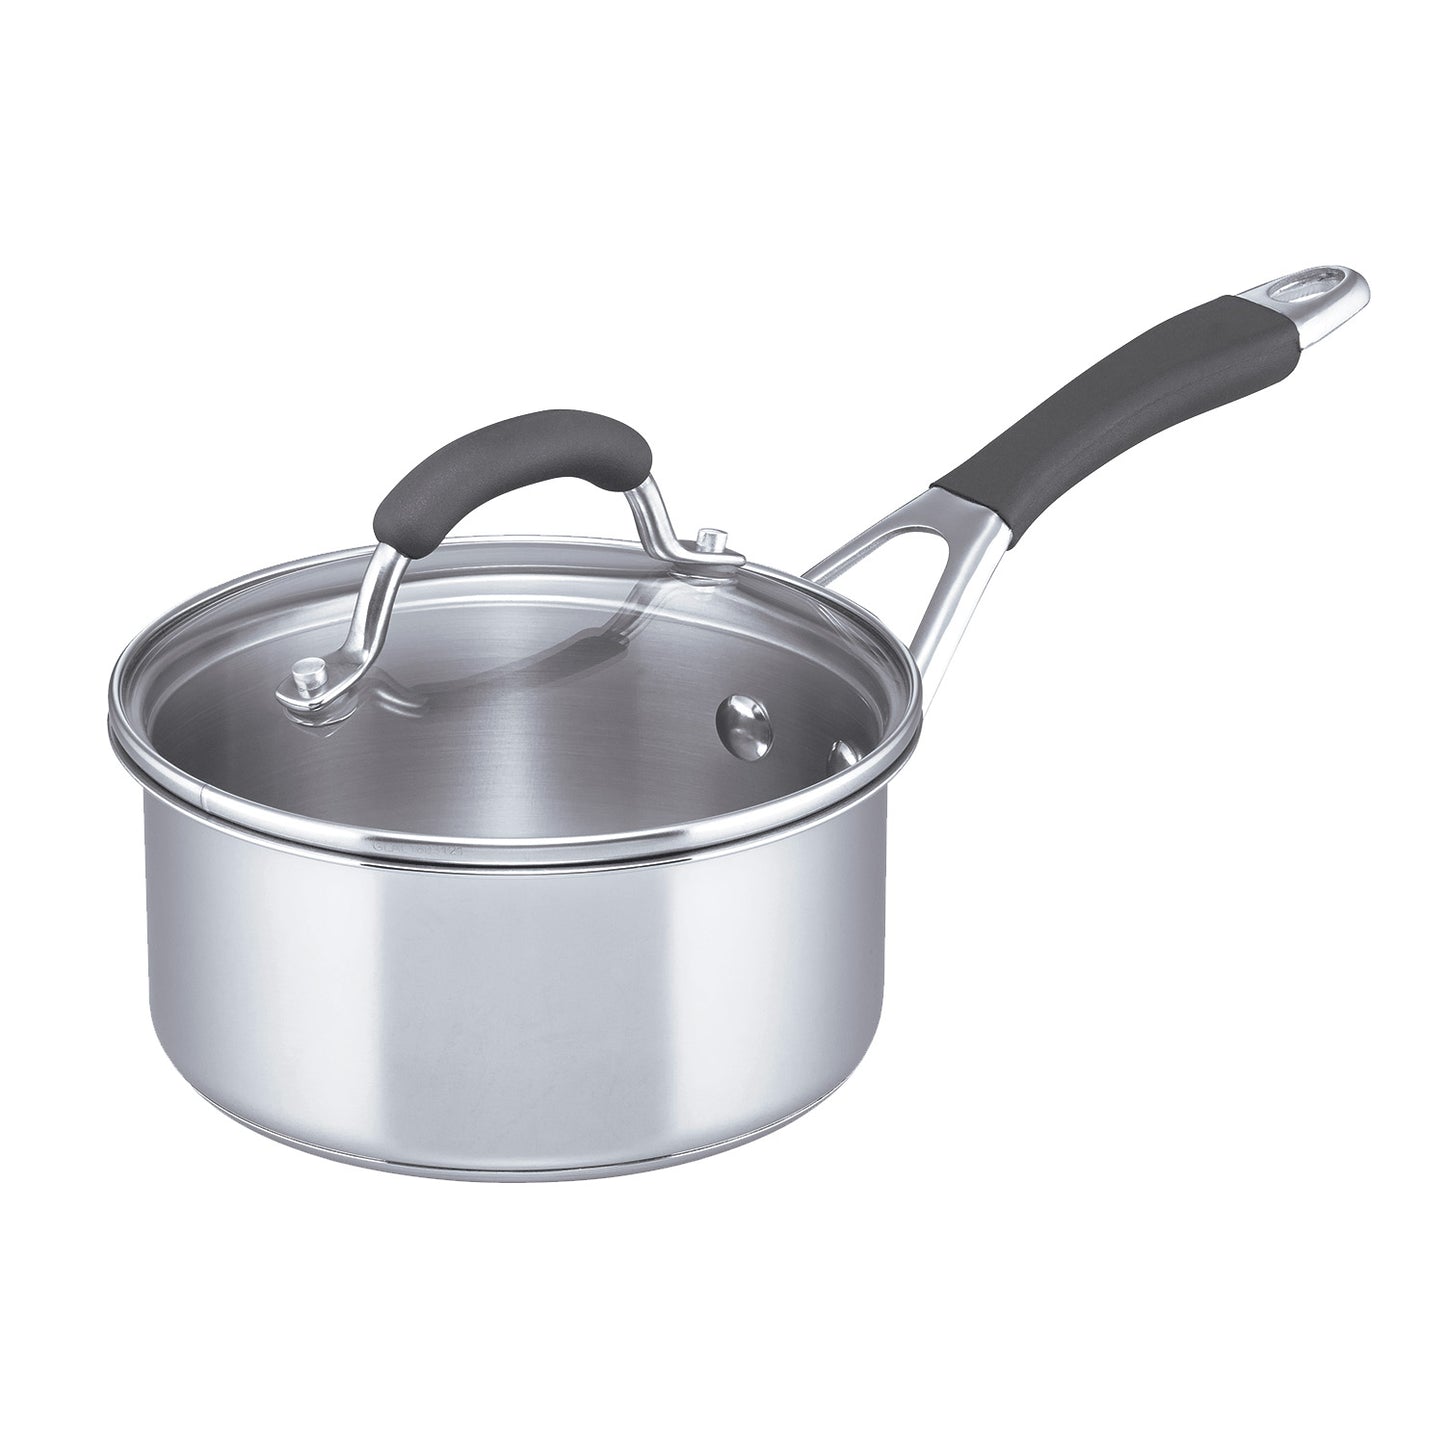 RACO Reliance Stainless Steel Induction Saucepan 16cm/1.4L